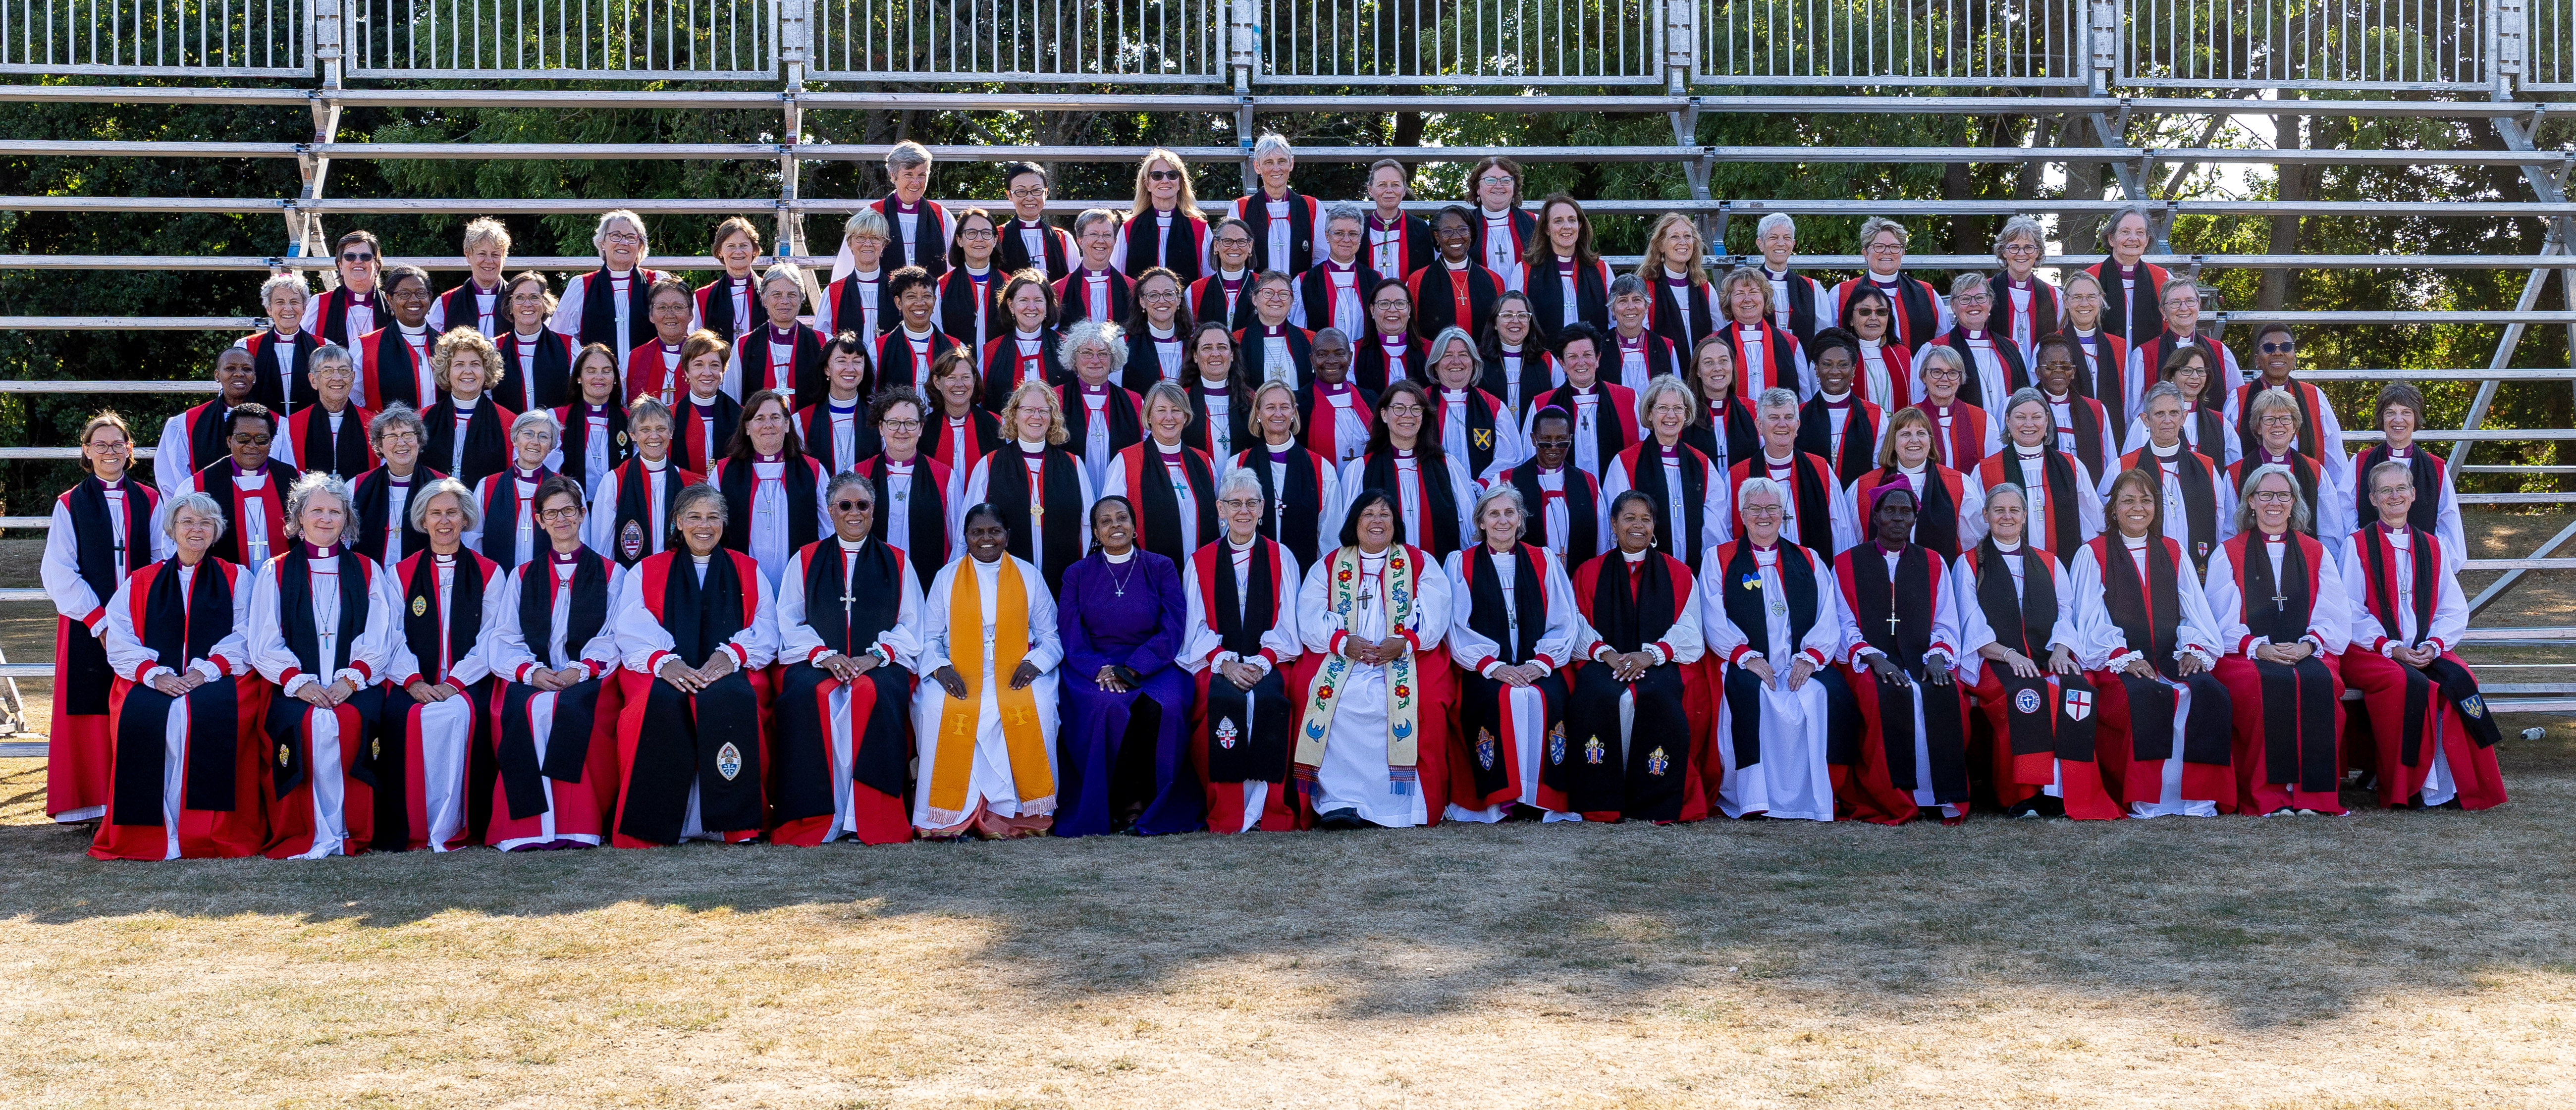 The women Bishops pose for their group photograph during the 2022 Lambeth Conference at the University of Kent in Canterbury, United Kingdom